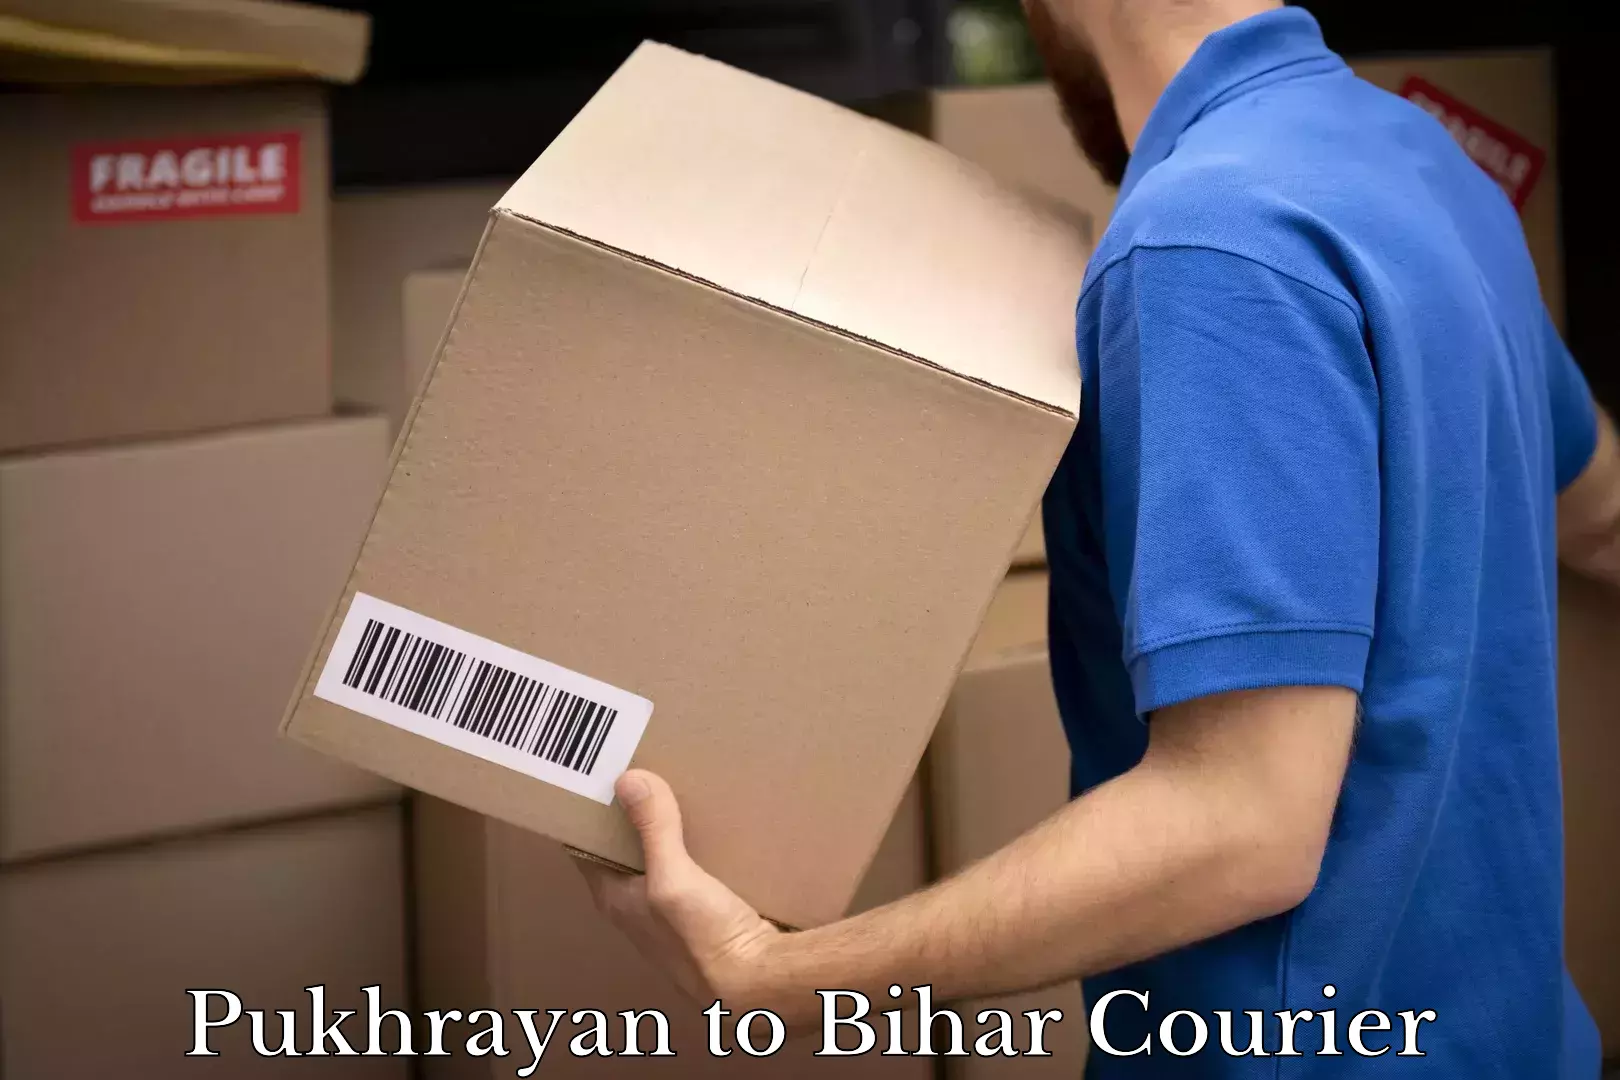 Local delivery service Pukhrayan to Bihar